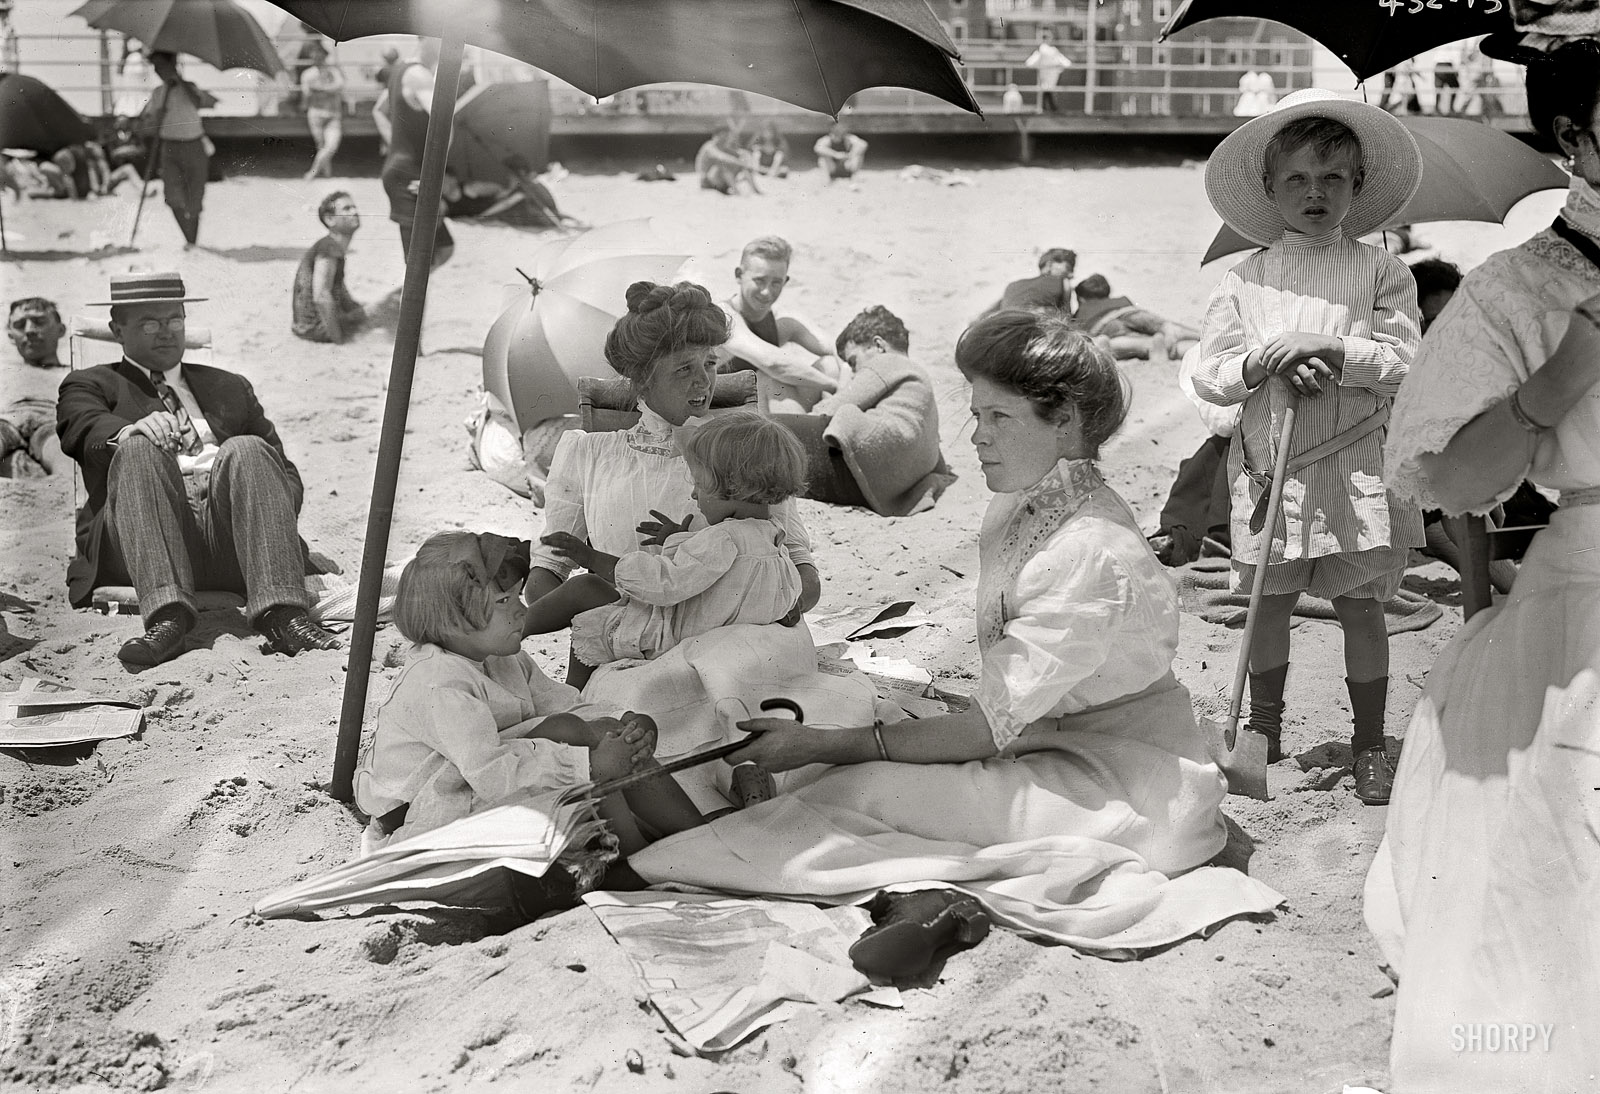 July 11, 1911. "On beach near Casino, Asbury Park." Anyone up for a nice cold lemonade? 5x7 glass negative, George Grantham Bain Collection. View full size.